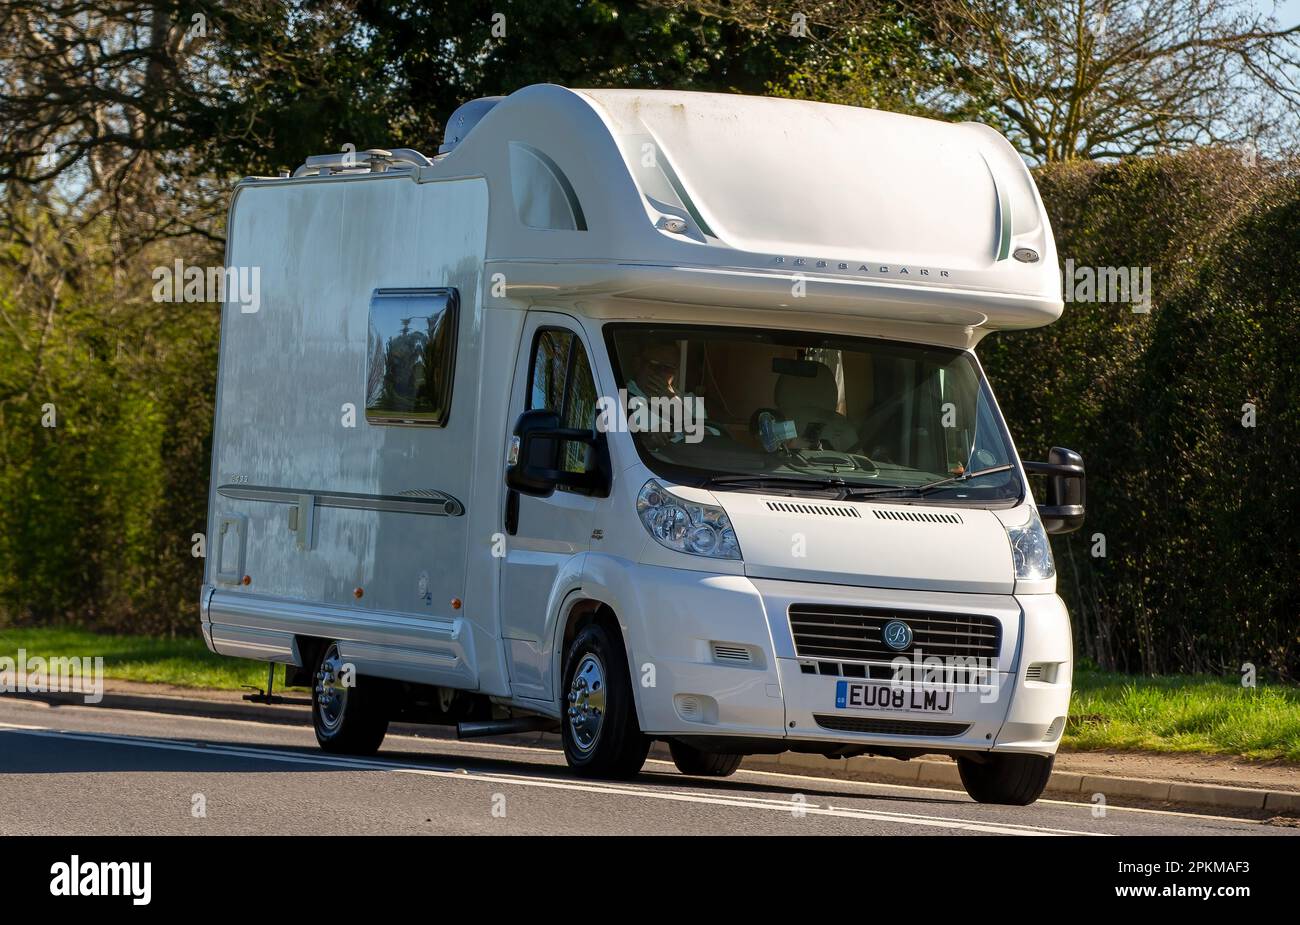 https://c8.alamy.com/comp/2PKMAF3/2008-fiat-ducato-camper-van-travelling-on-an-english-country-road-2PKMAF3.jpg